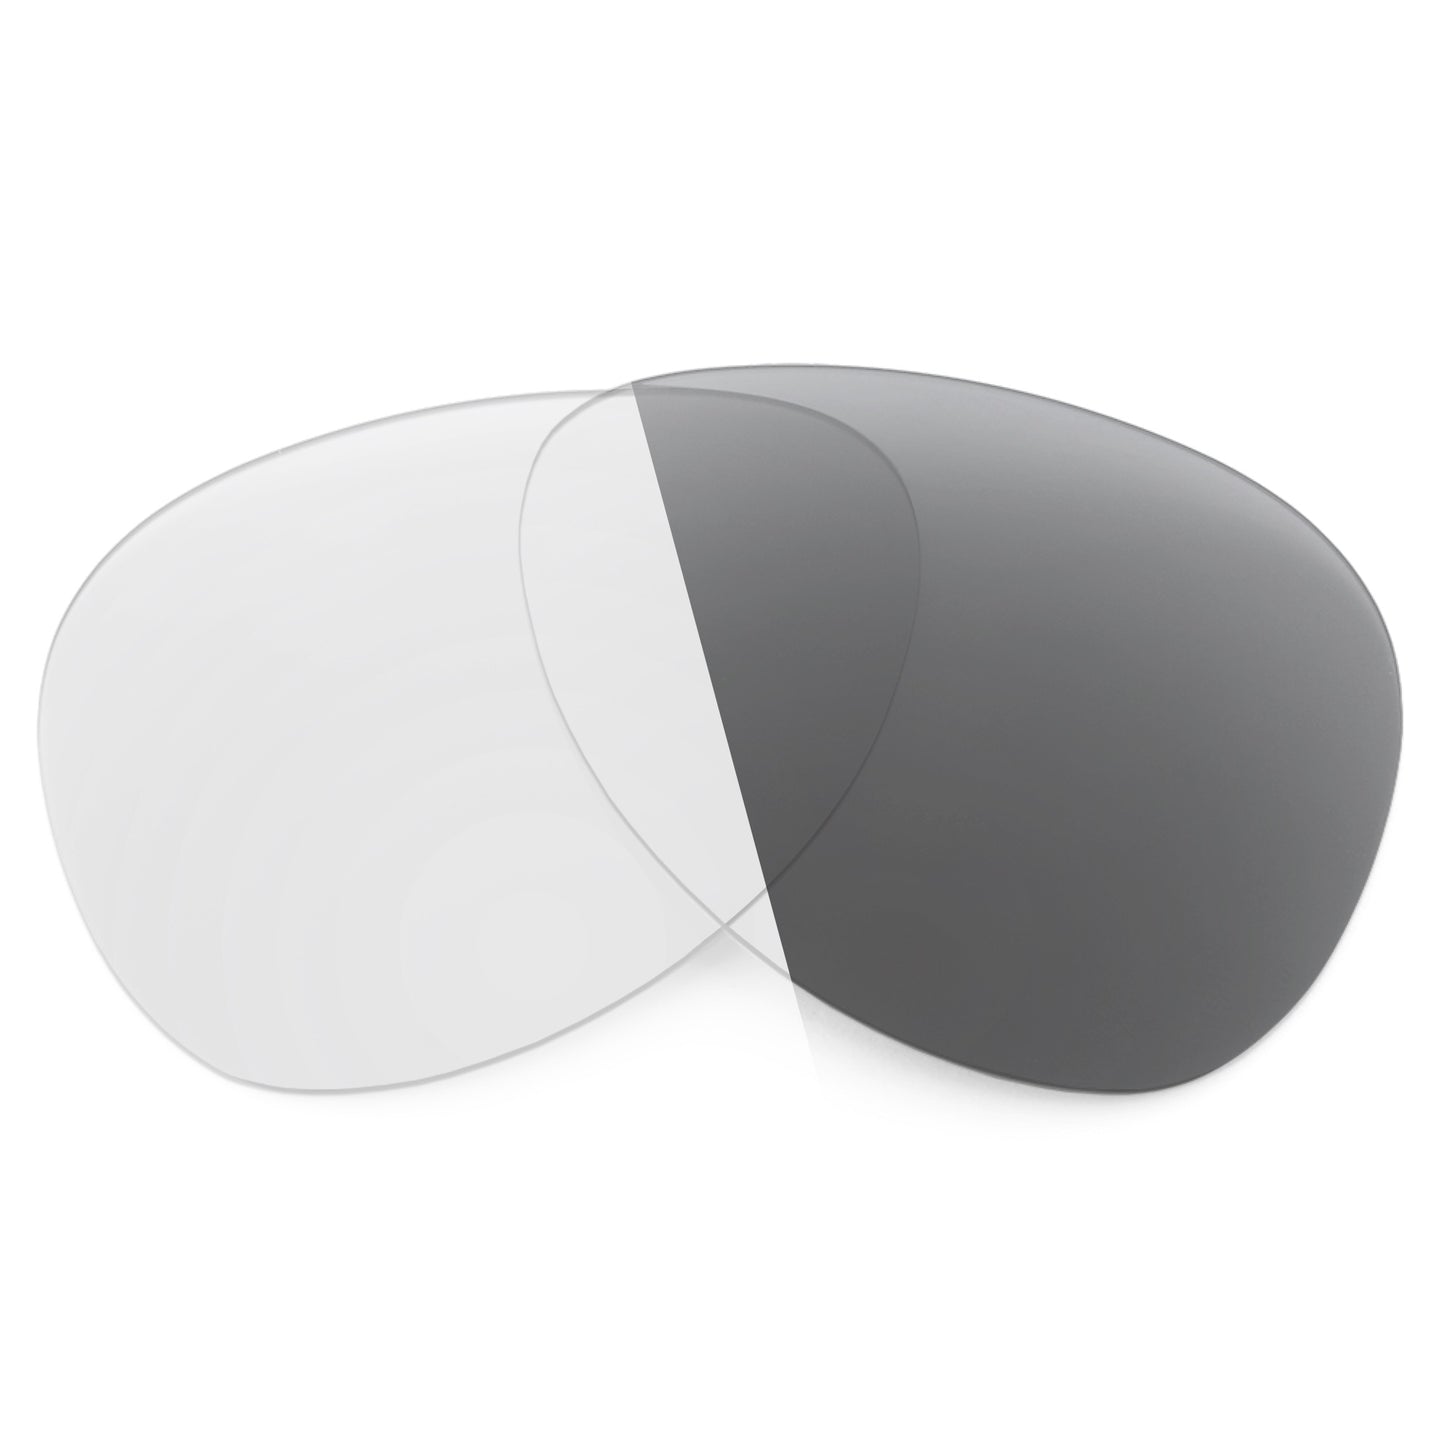 Revant replacement lenses for Ray-Ban Outdoorsman II RB3029 62mm Non-Polarized Adapt Gray Photochromic